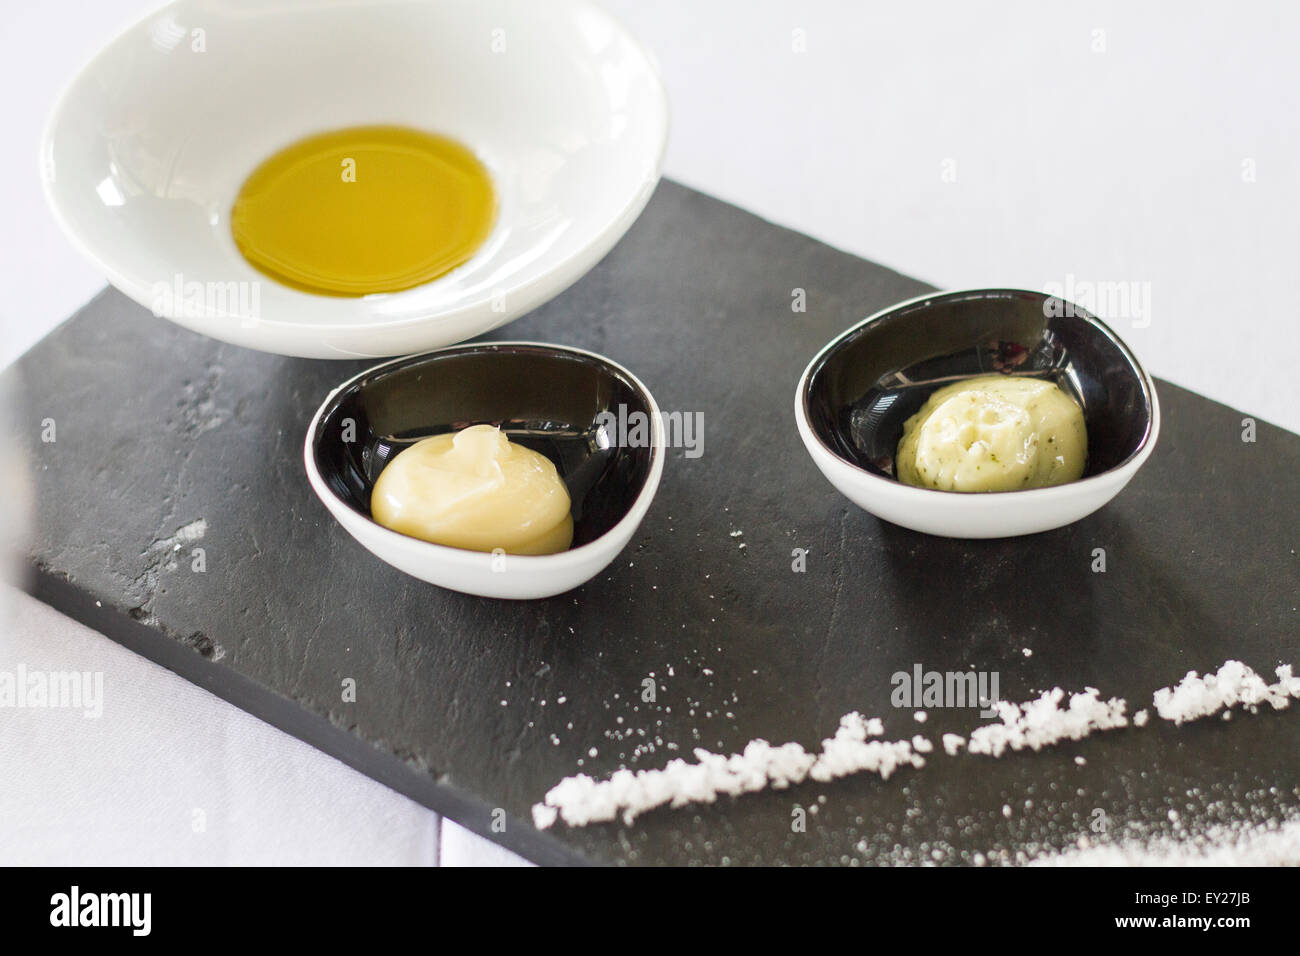 Butter and oil plate Stock Photo